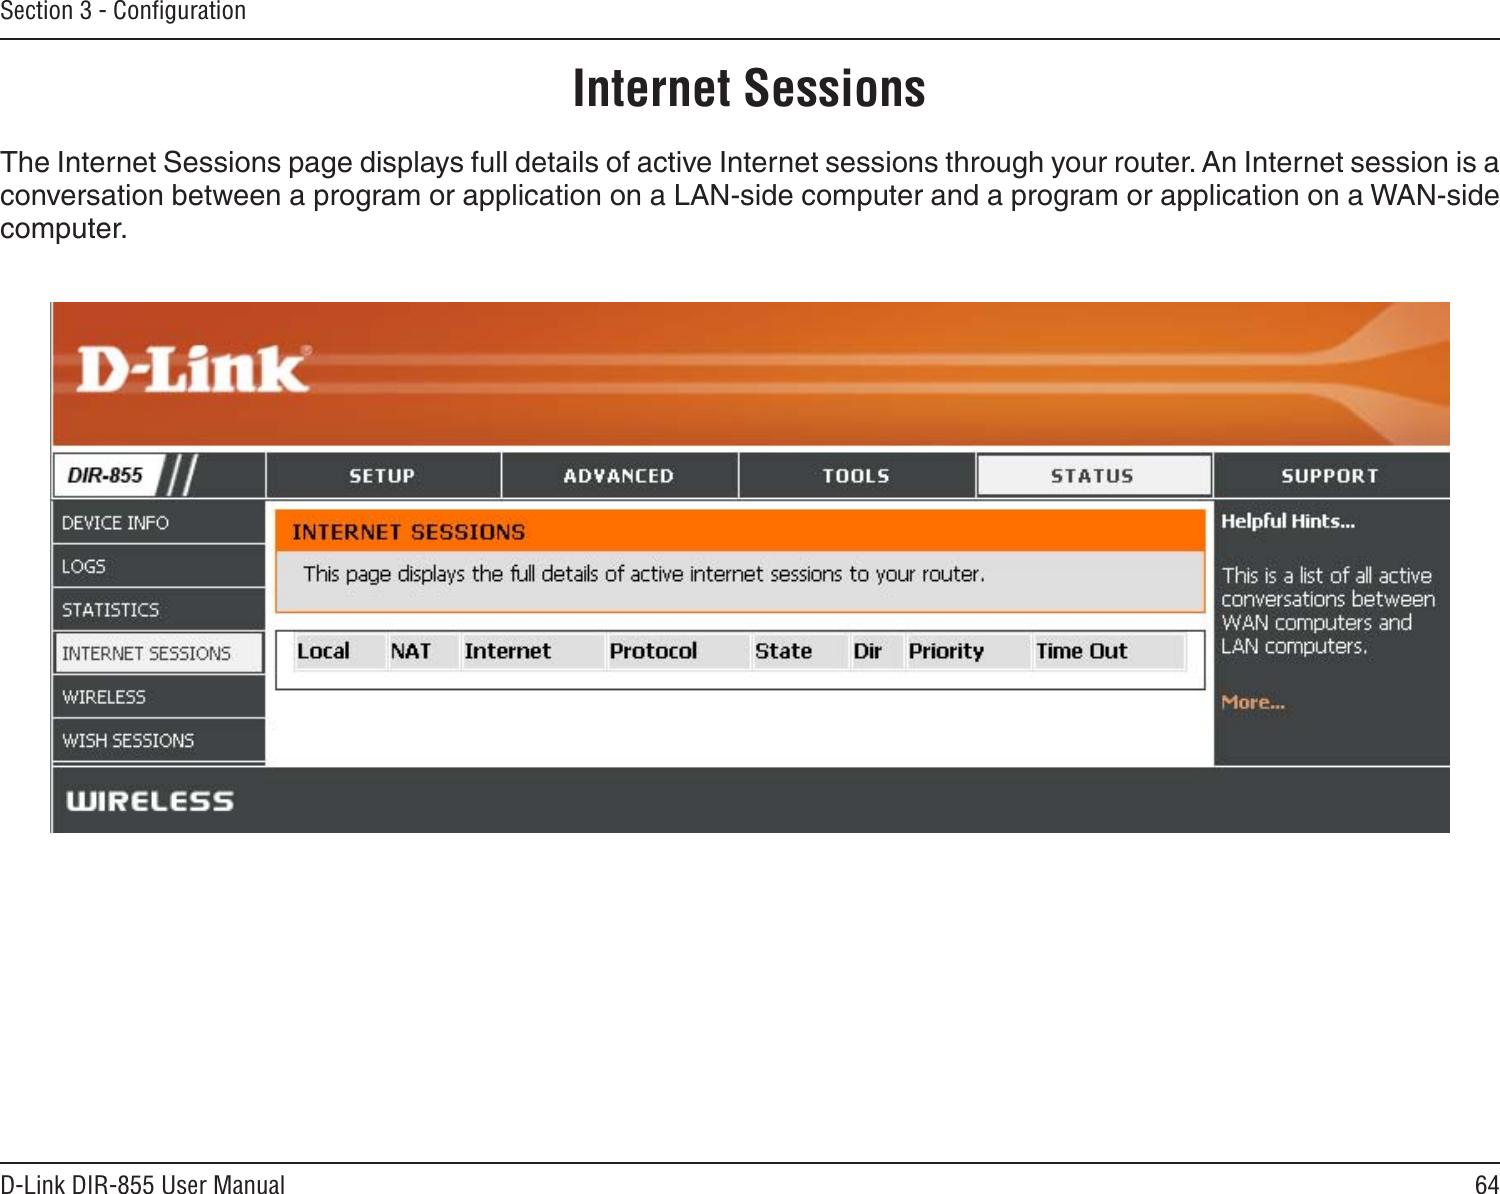 64D-Link DIR-855 User ManualSection 3 - ConﬁgurationInternet SessionsThe Internet Sessions page displays full details of active Internet sessions through your router. An Internet session is a conversation between a program or application on a LAN-side computer and a program or application on a WAN-side computer. 